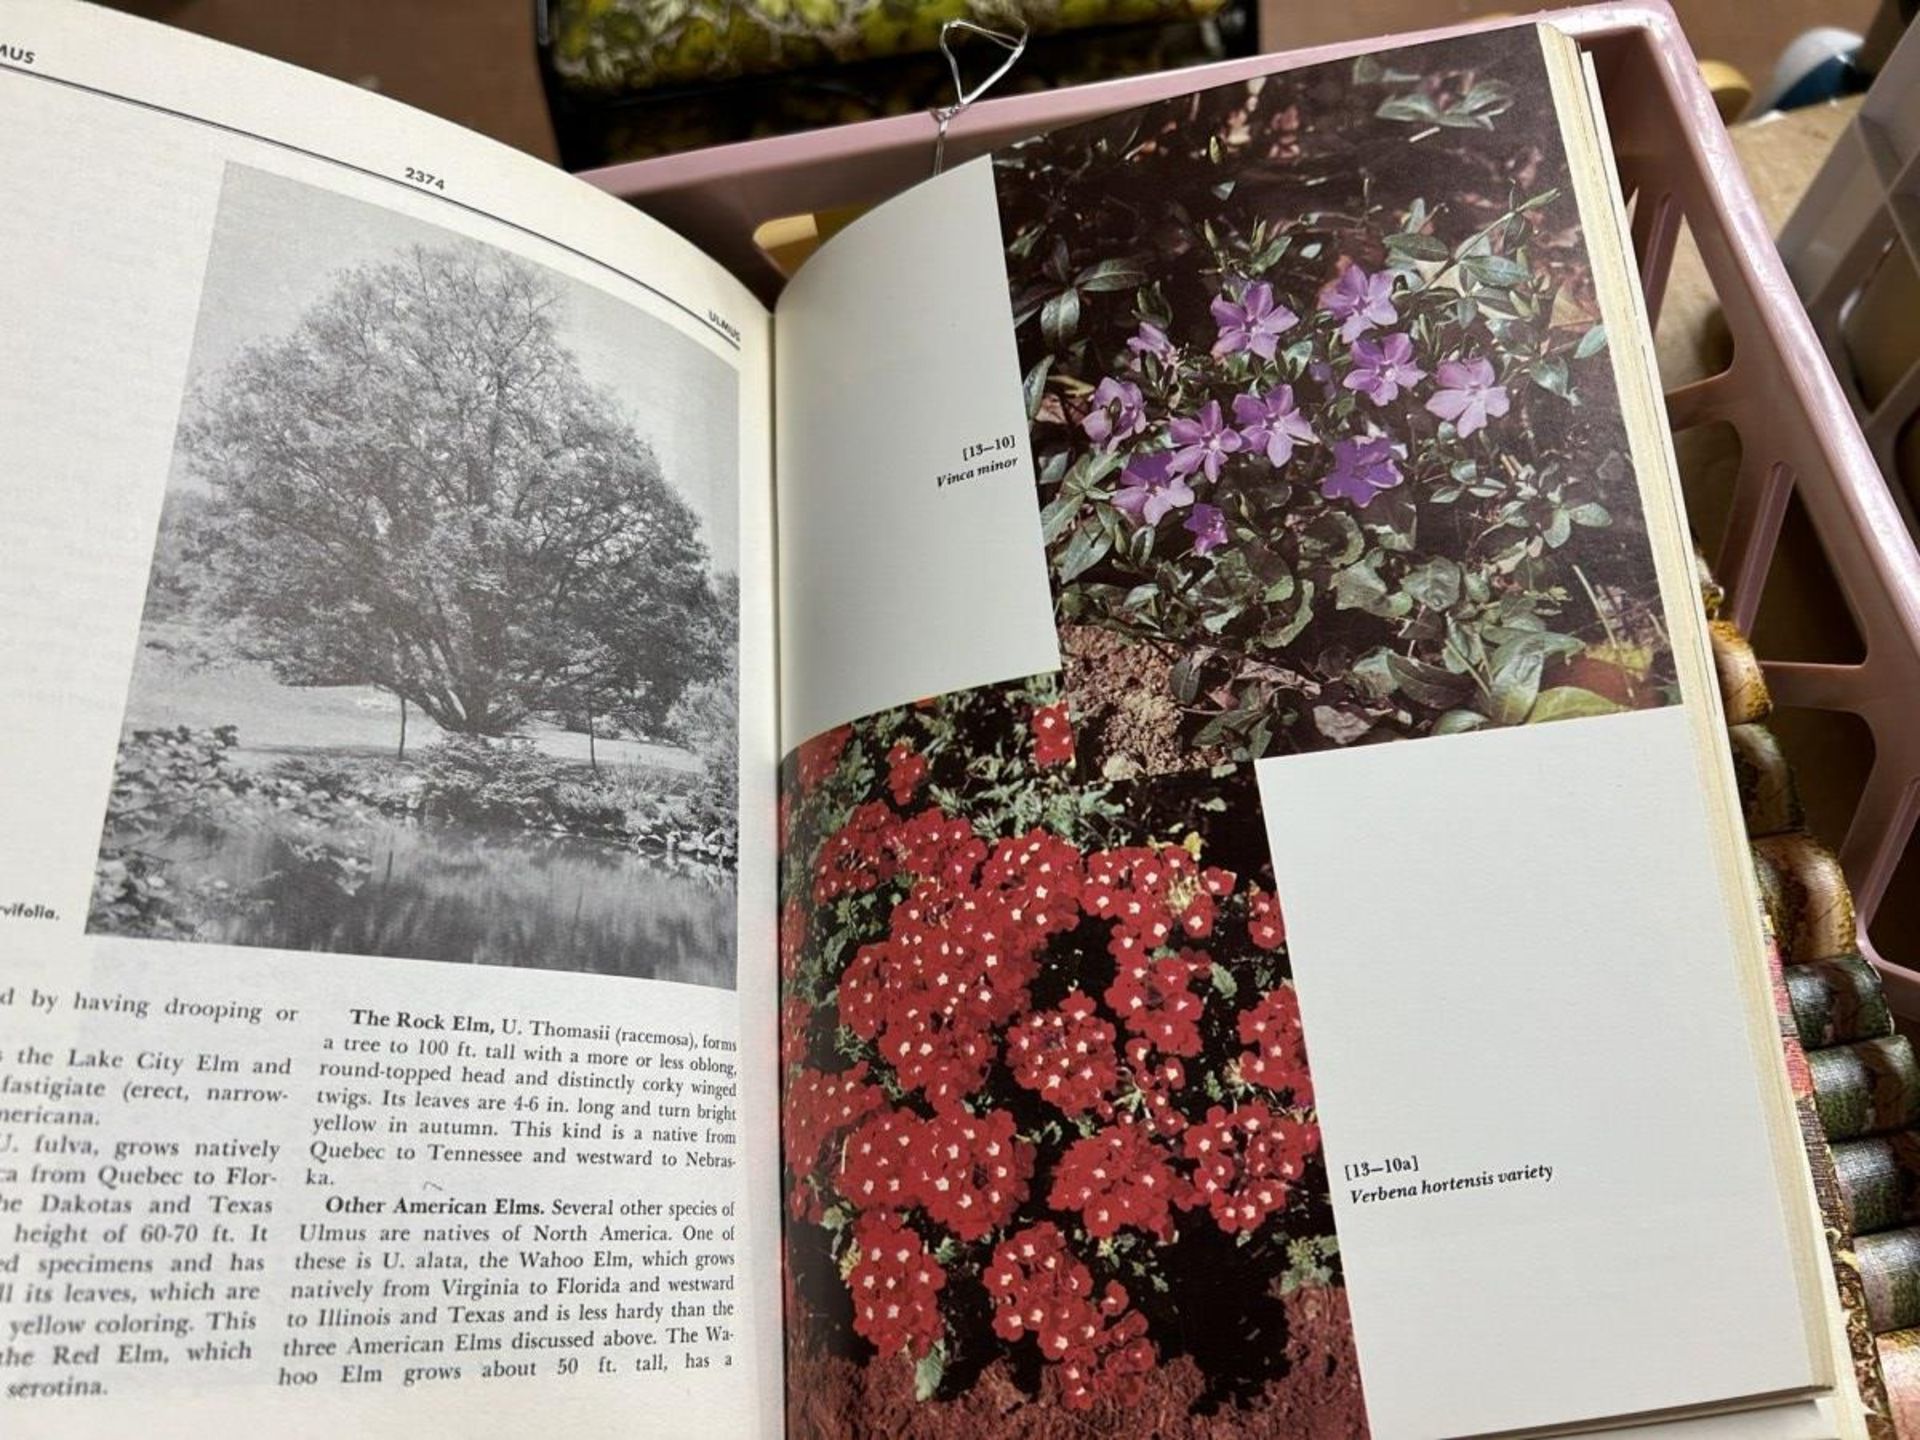 SET OF NEW ILLUSTRATED ENCYCLOPEDIA OF GARDENING BOOKS, SET 1-7 ALBERTA IN THE 20TH CENTURY BOOKS - Image 5 of 5